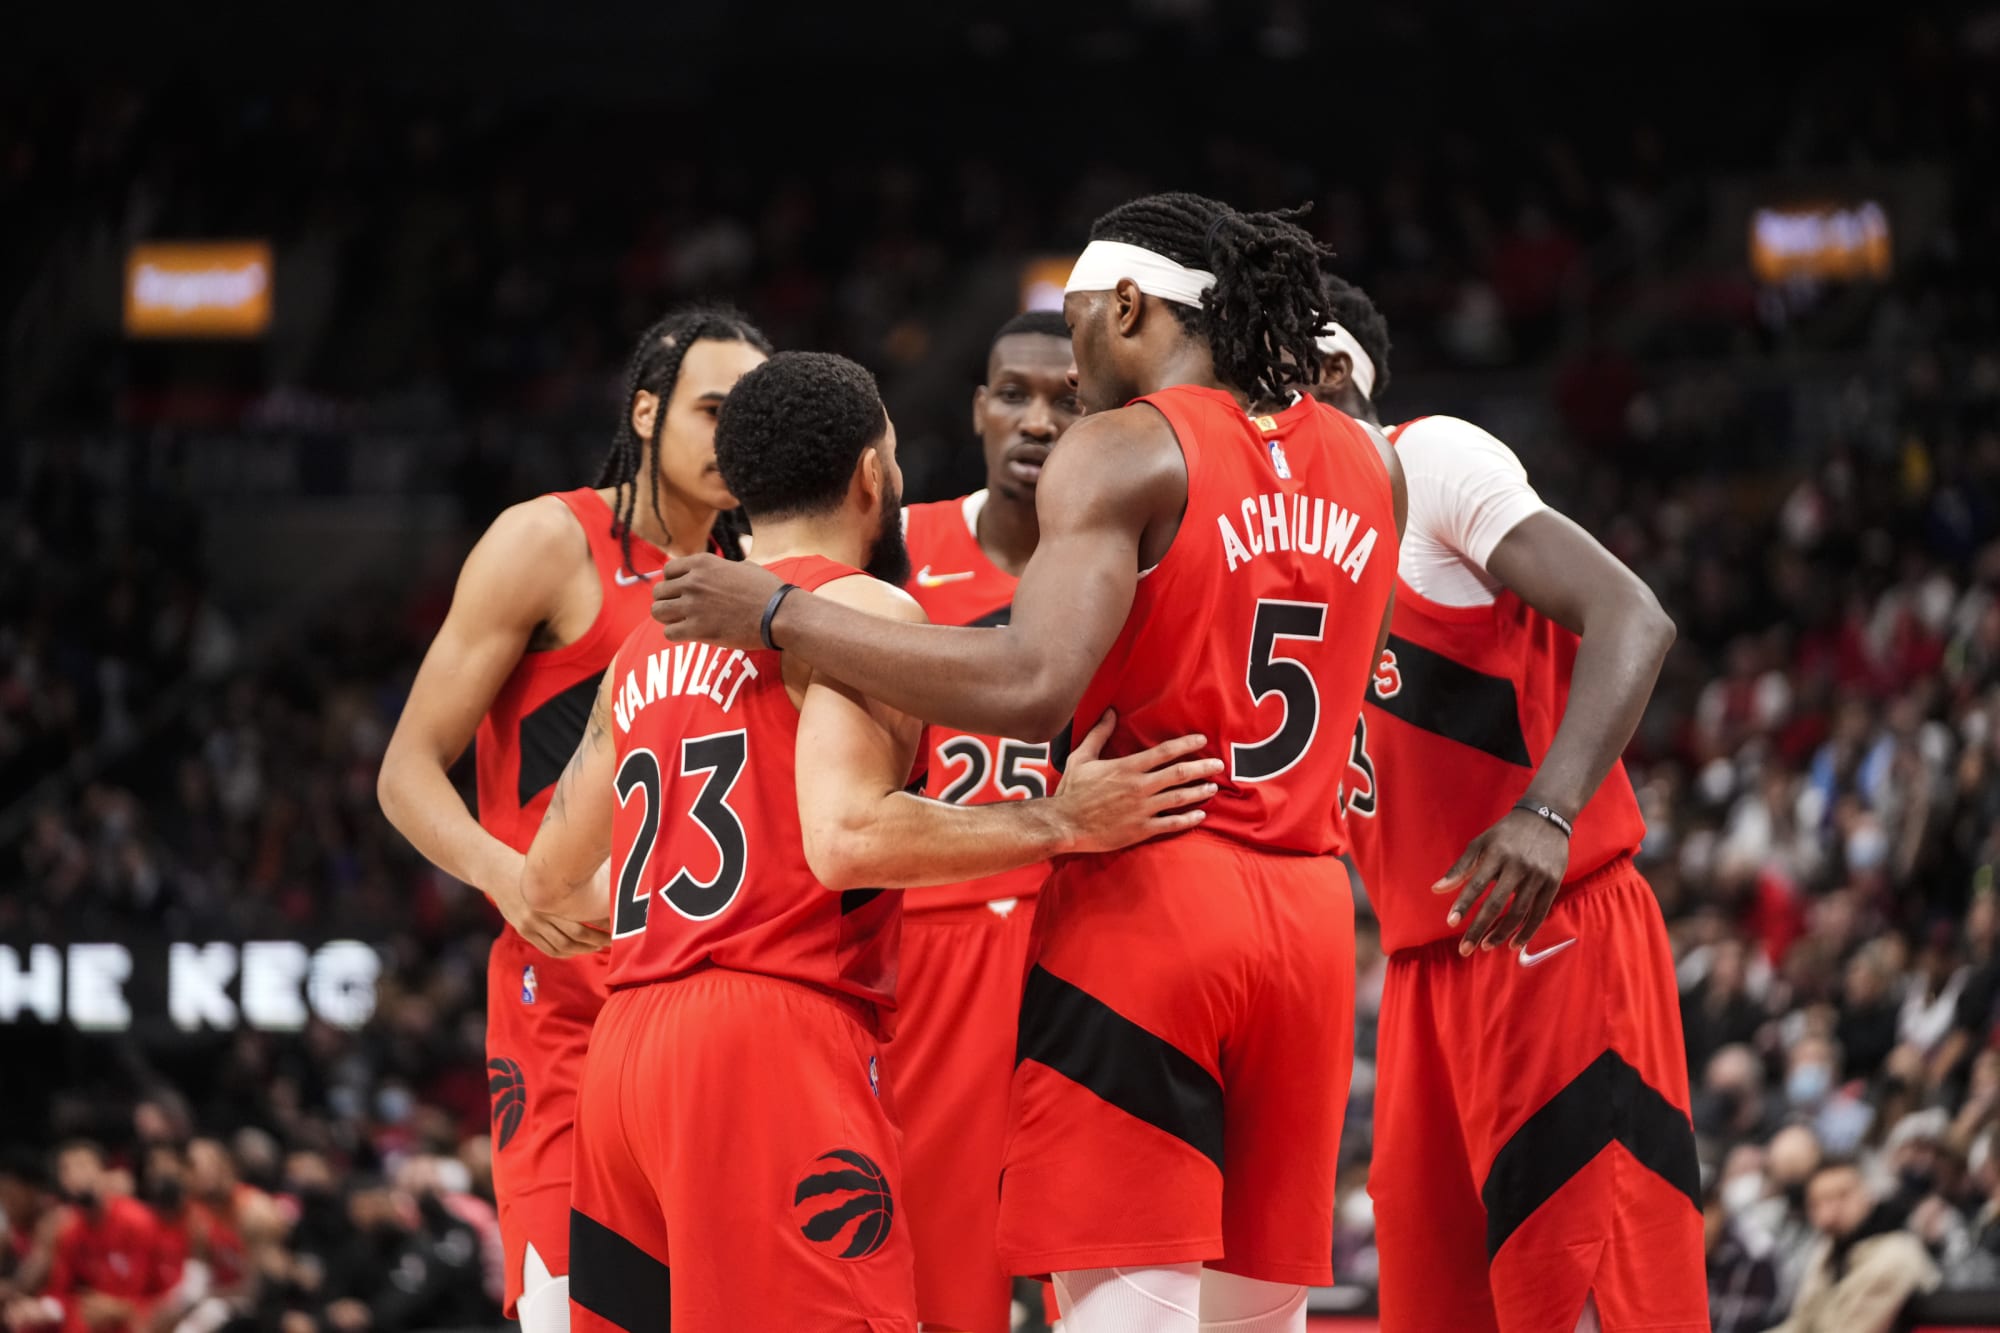 Chanukah gifts and wishes for Toronto Raptors fans this holiday season